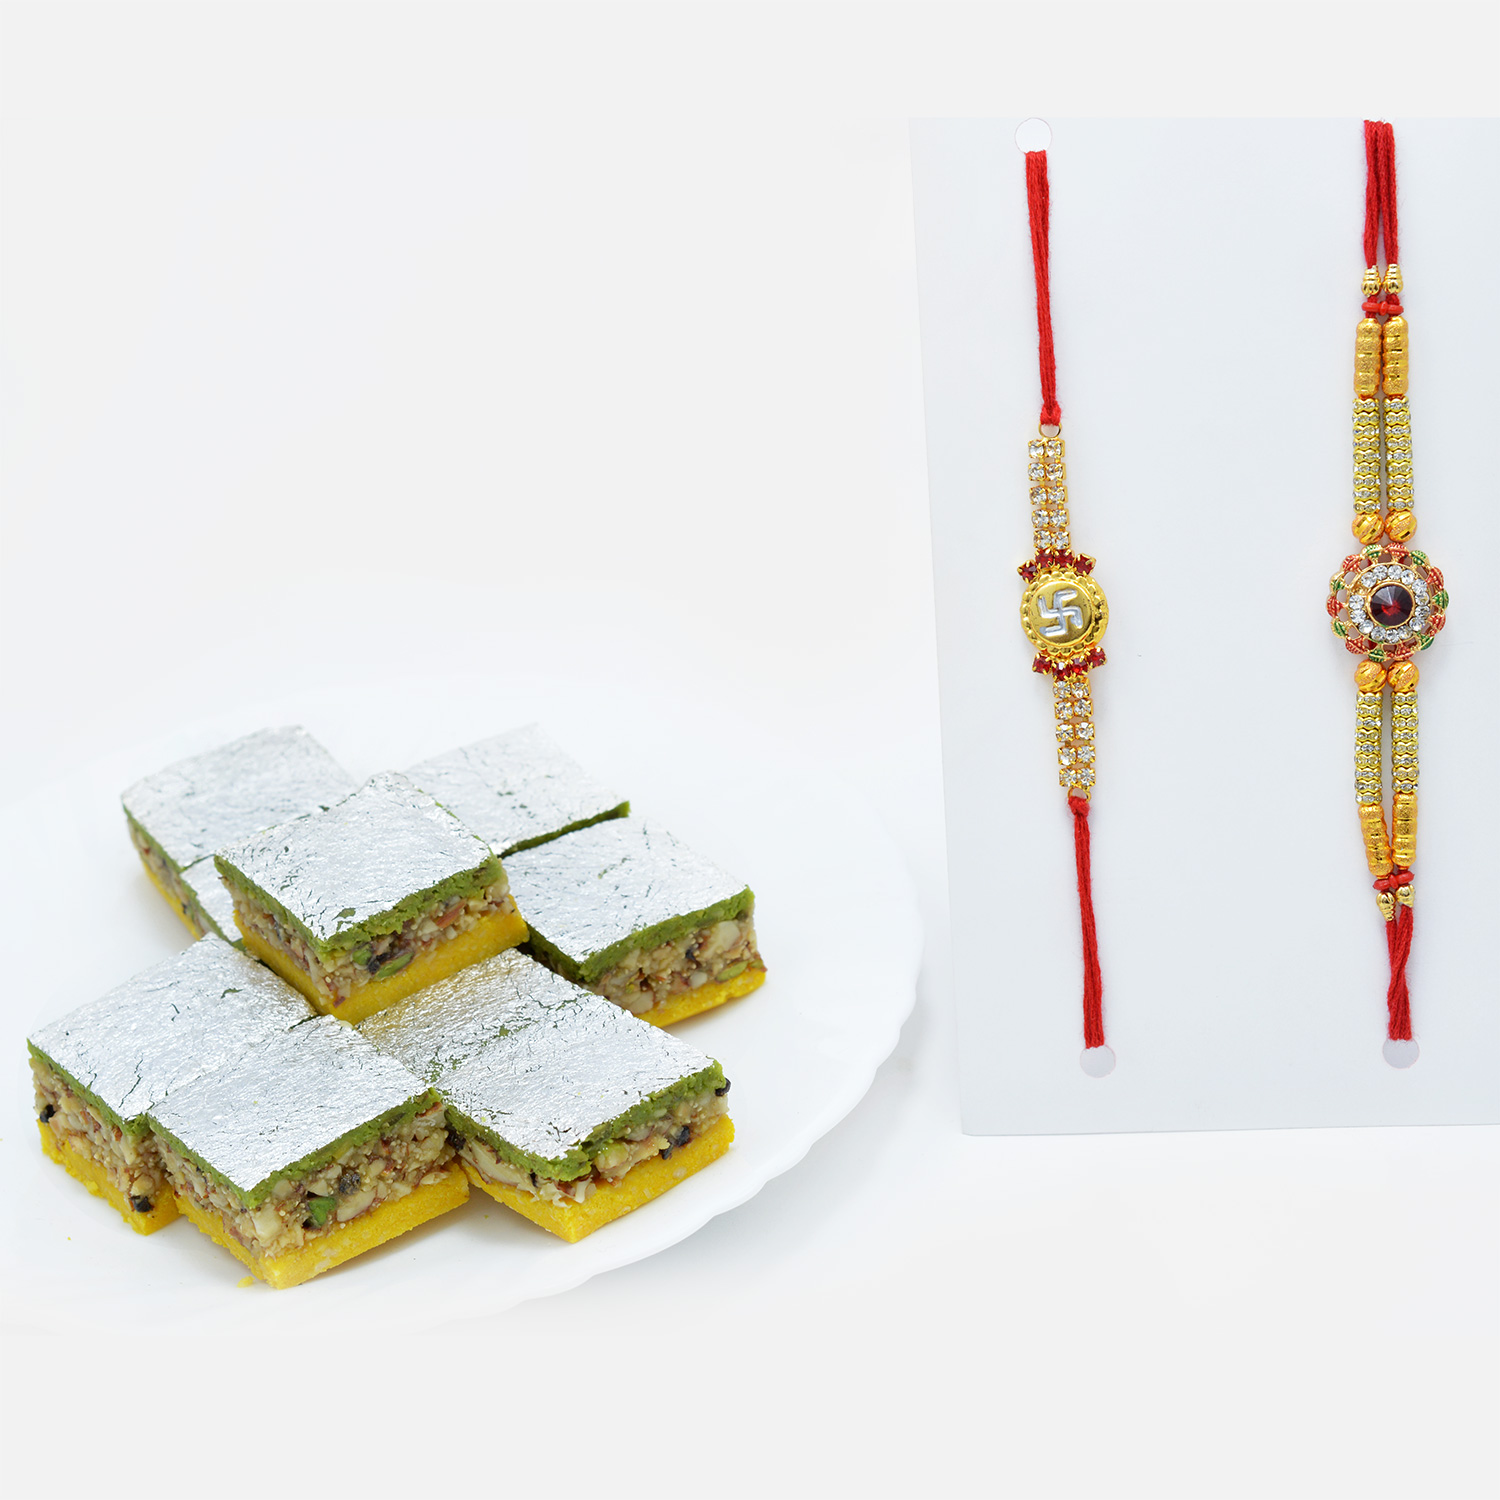 Delicious Pista Badam Barfi with Stunning Rakhi Set of 2 for Brothers